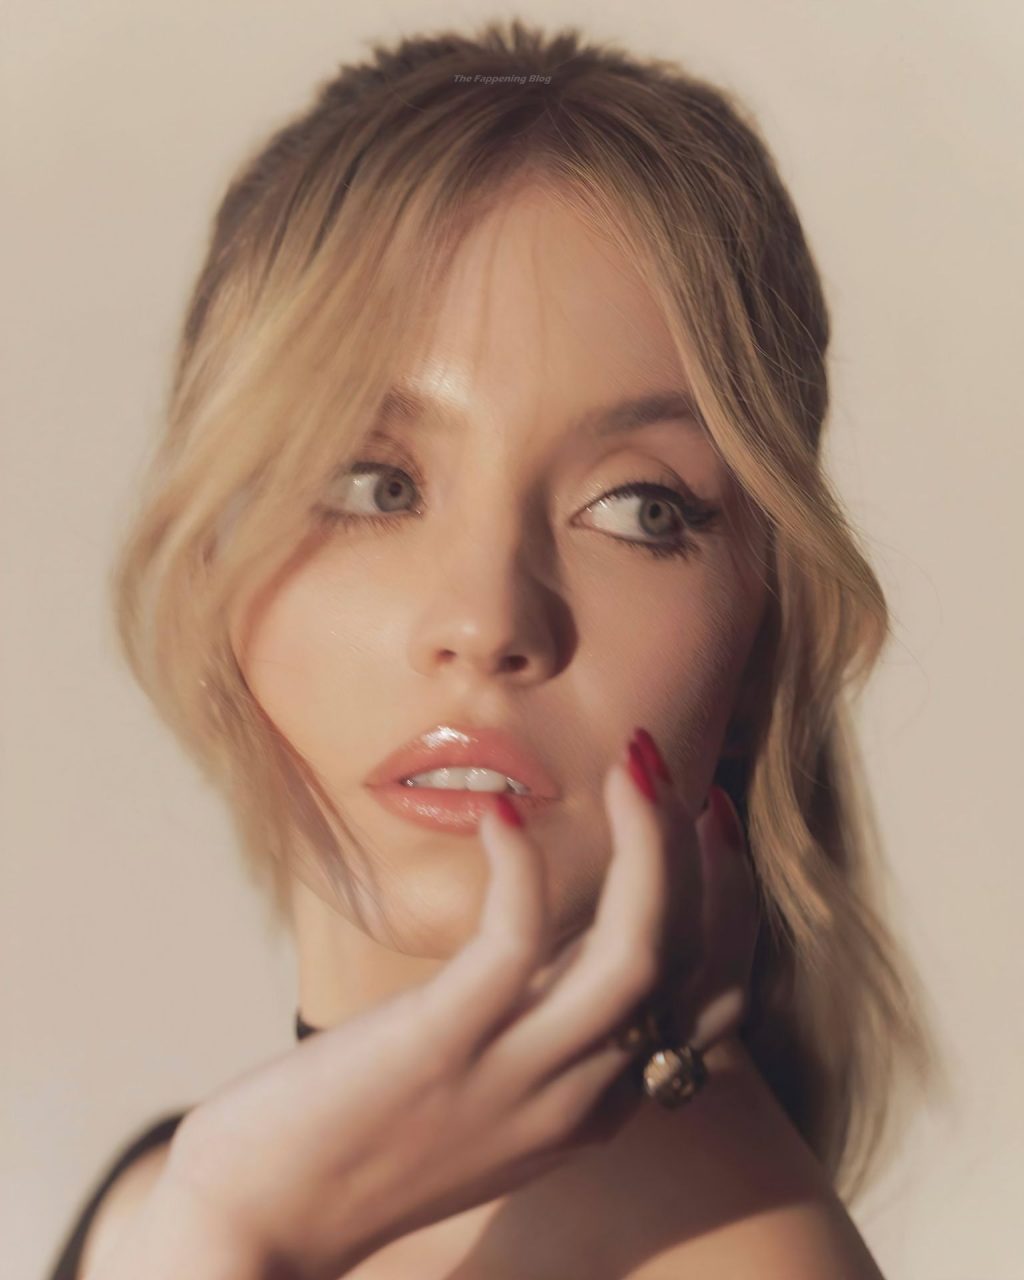 Sydney Sweeney Shows Off Her Ample Cleavage for ‘The Voyeurs’ (11 Photos)